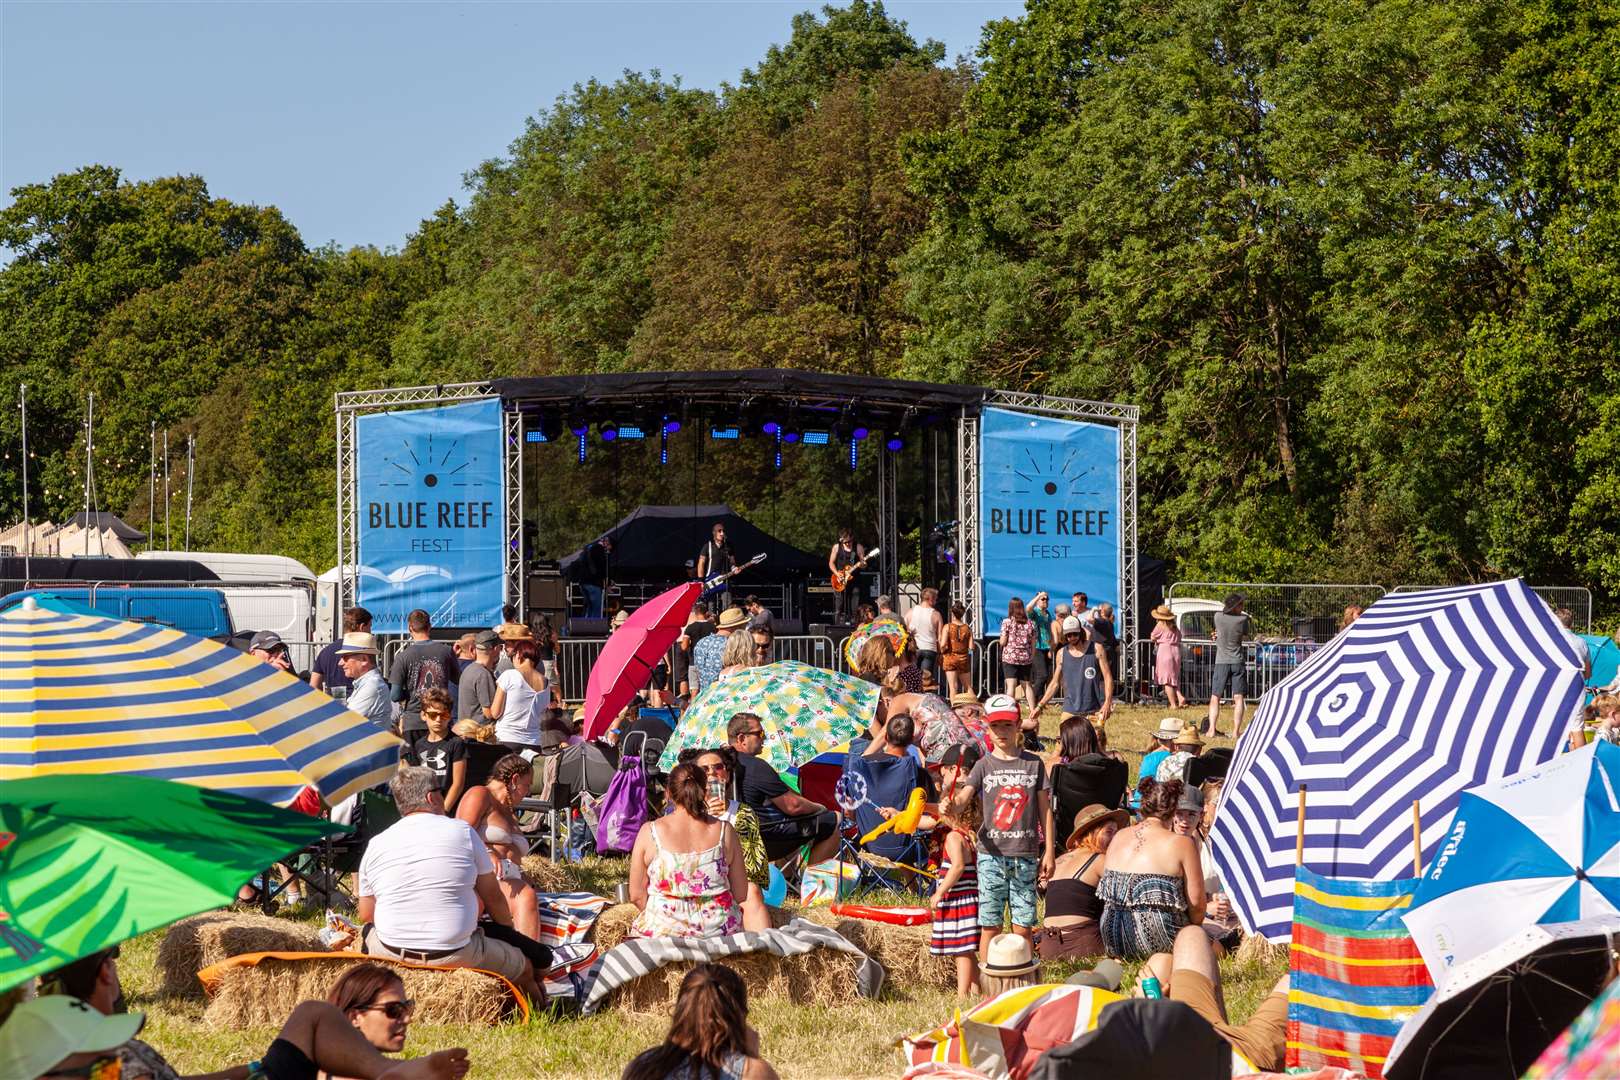 A scene from last year's Blue Reef Festival. Photo: Richard Butters